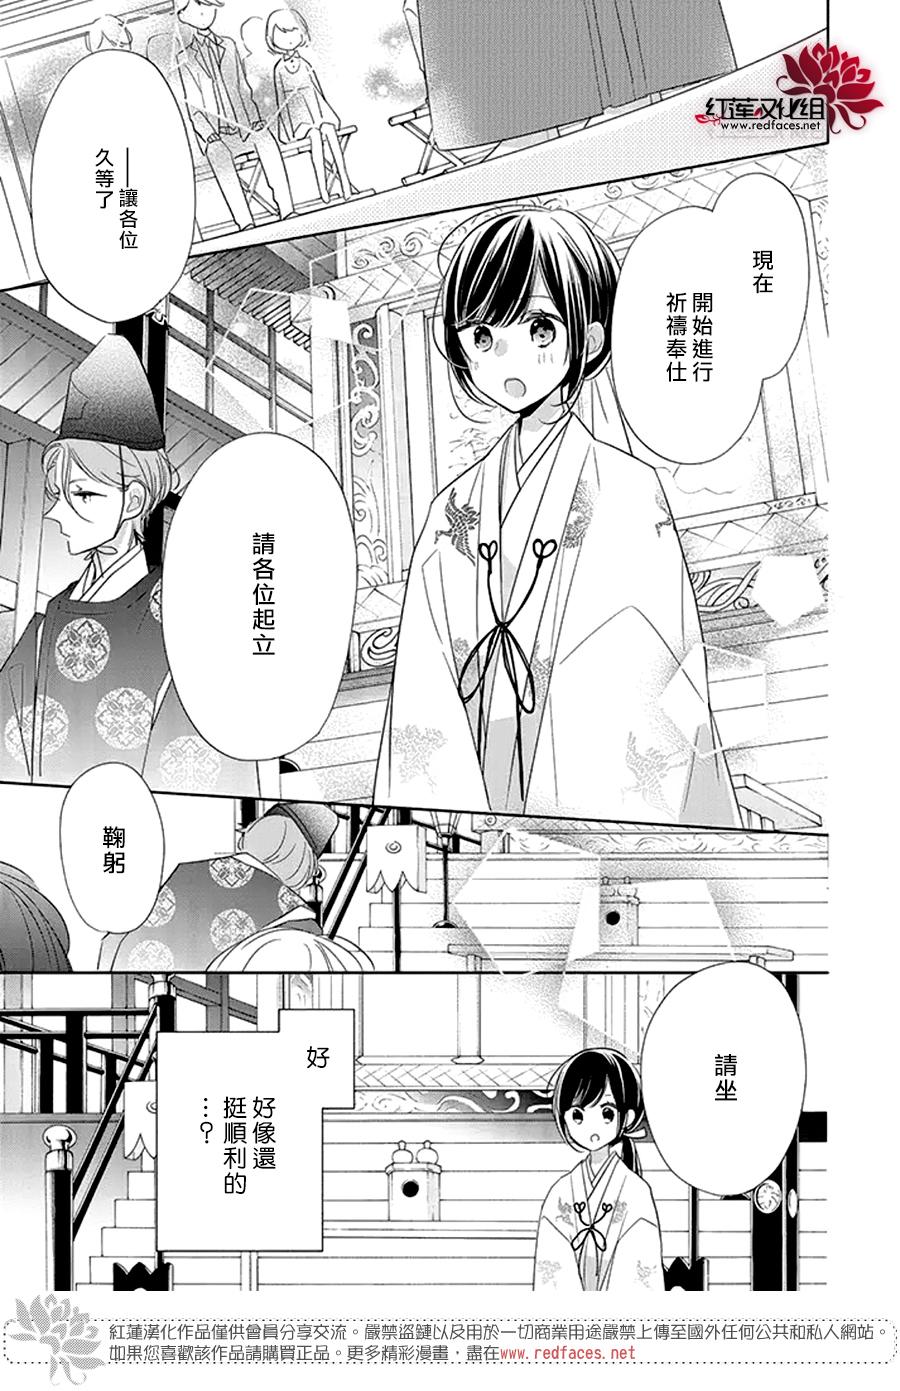 If given a second chance - 23話 - 6